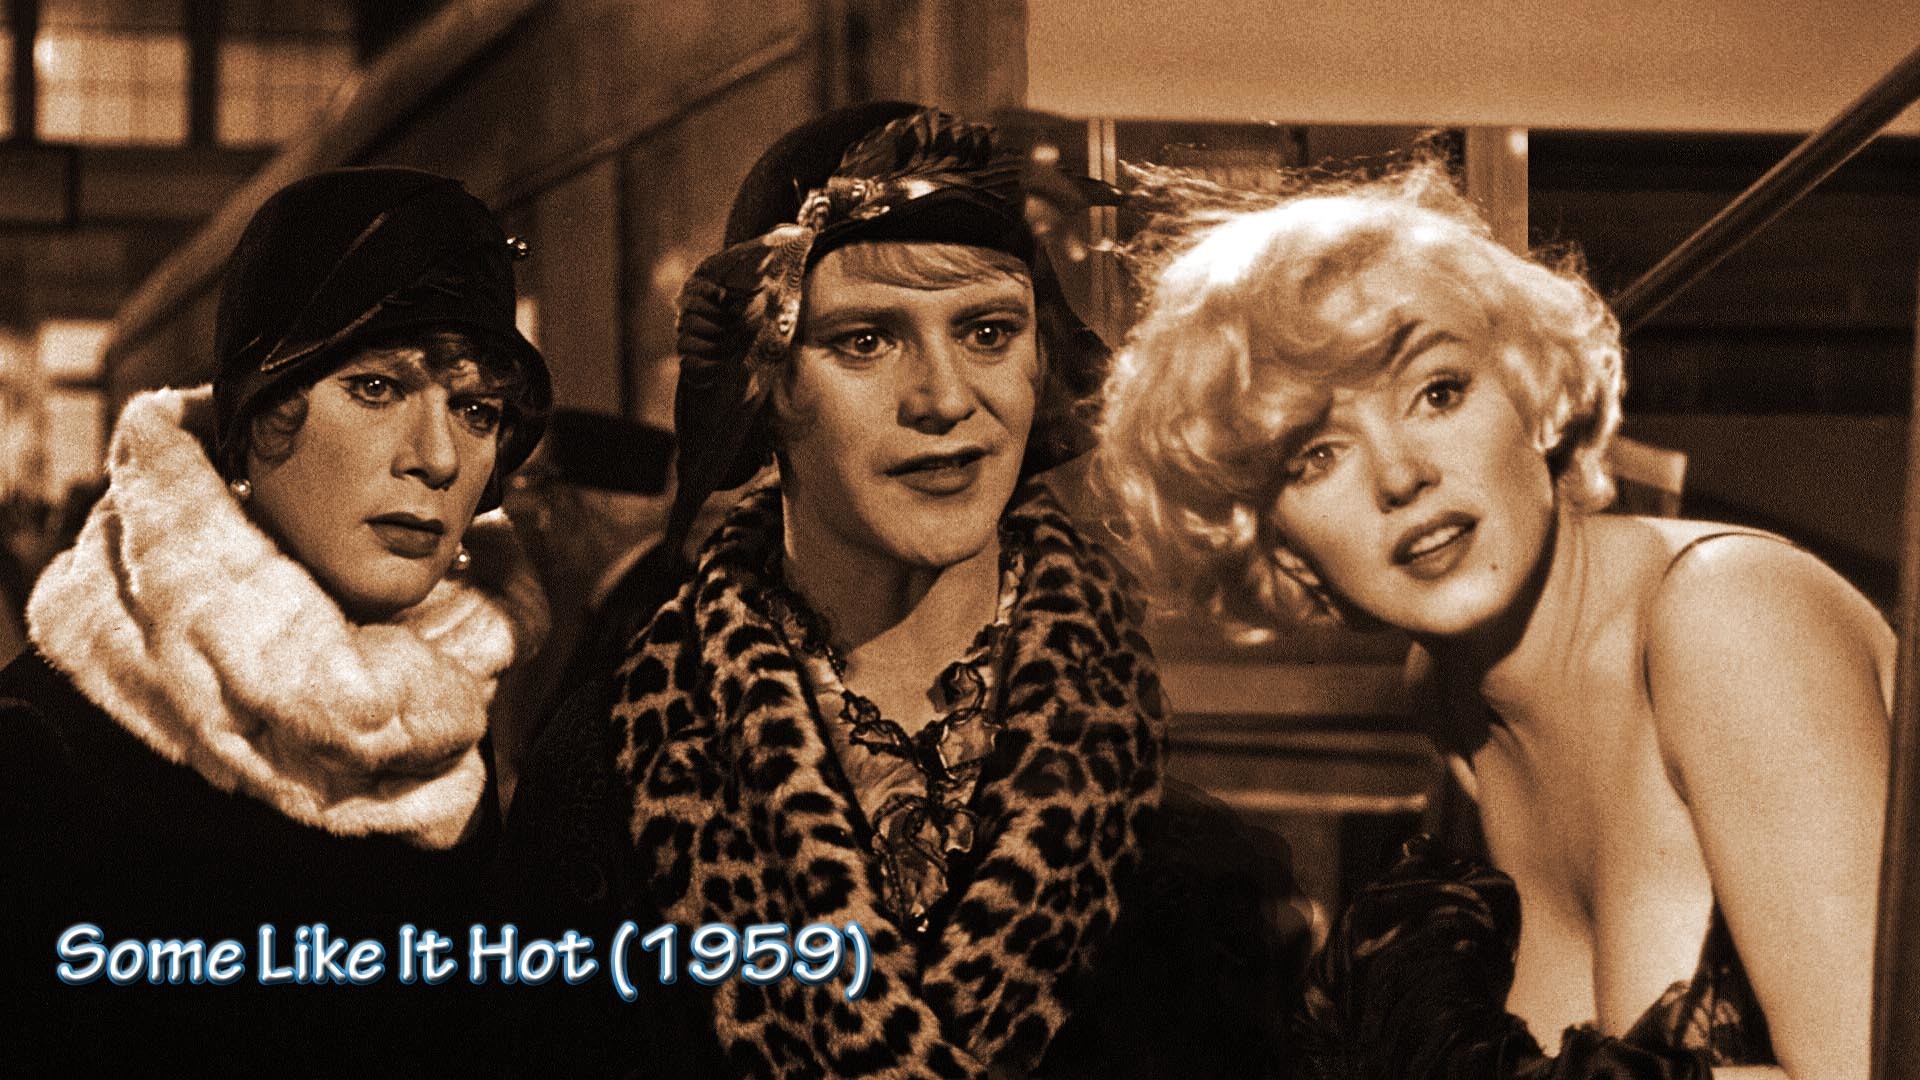 1920x1080 Some Like It Hot 1959 - Classic Movies Wallpaper (33682338 .